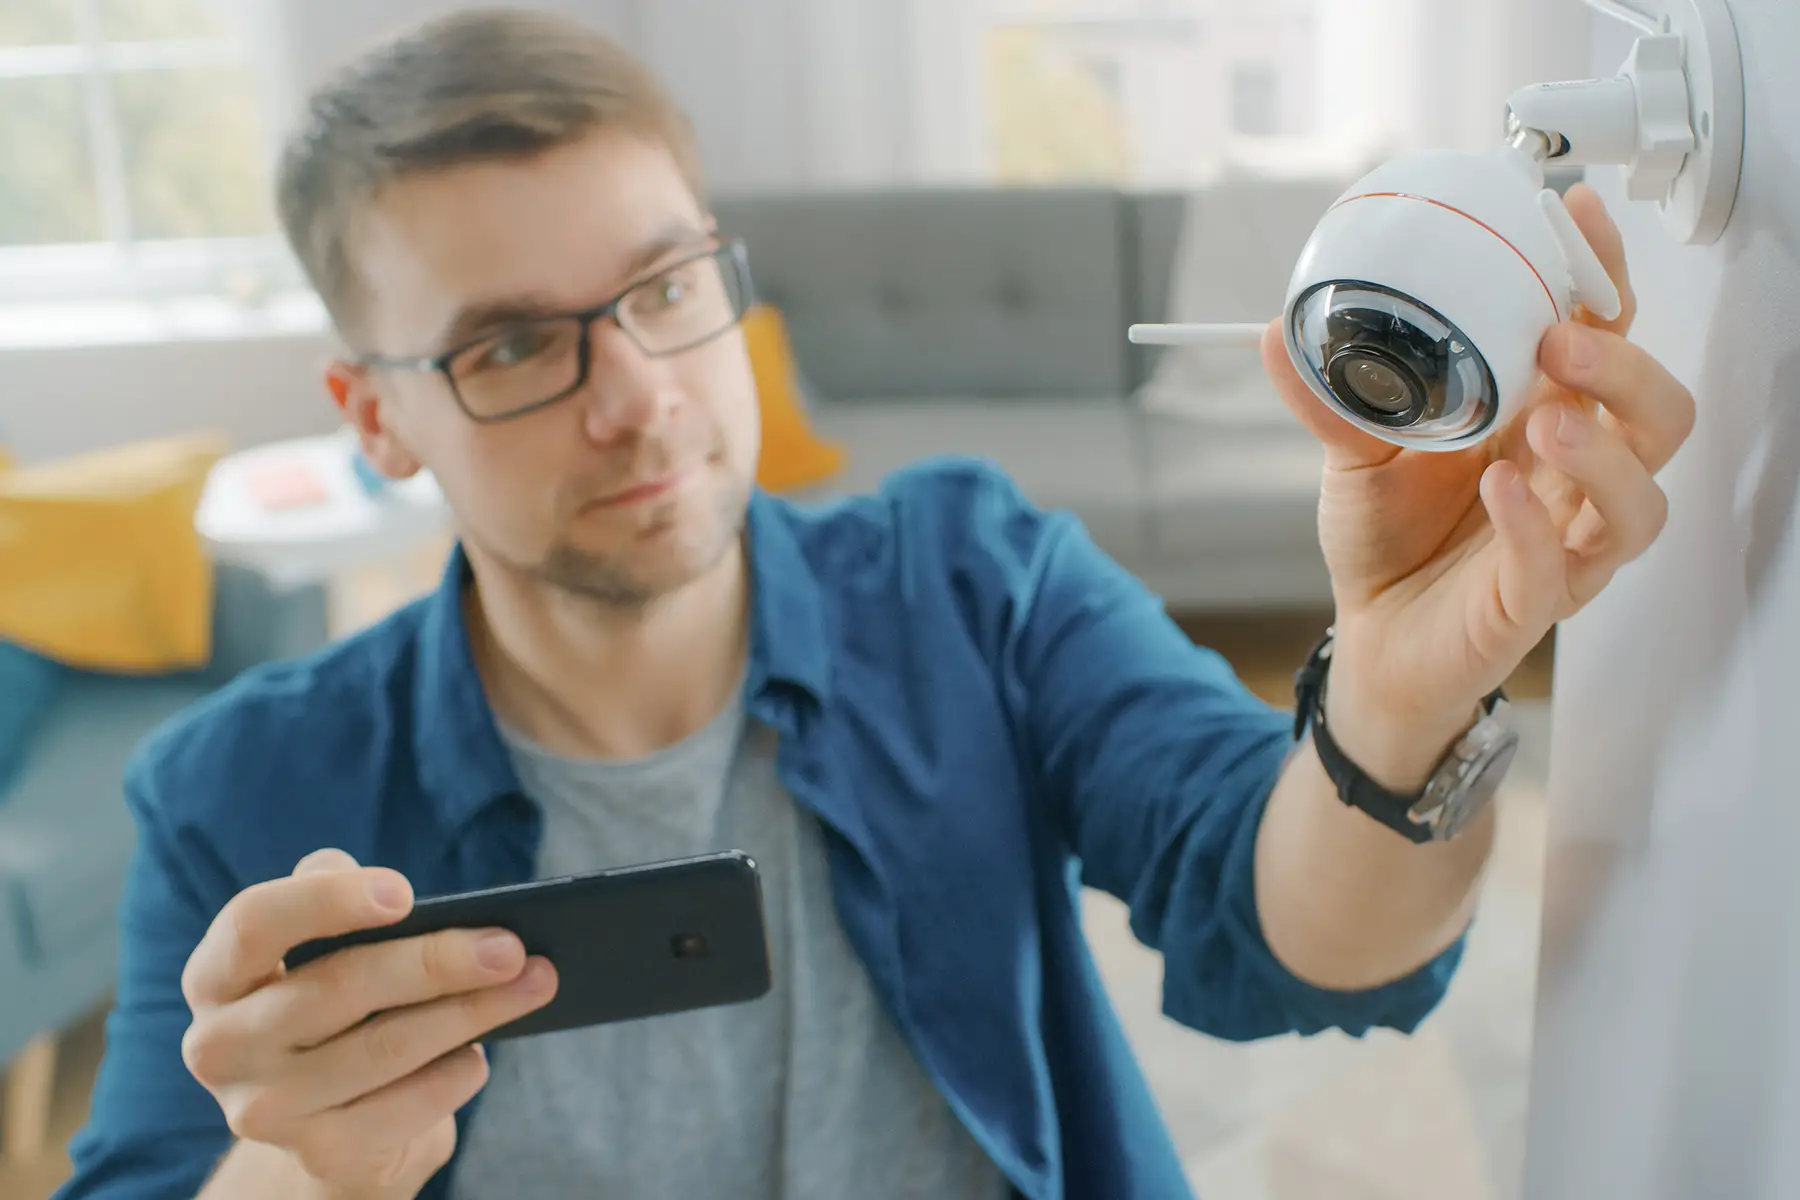 man fitting camera as part of his home security system